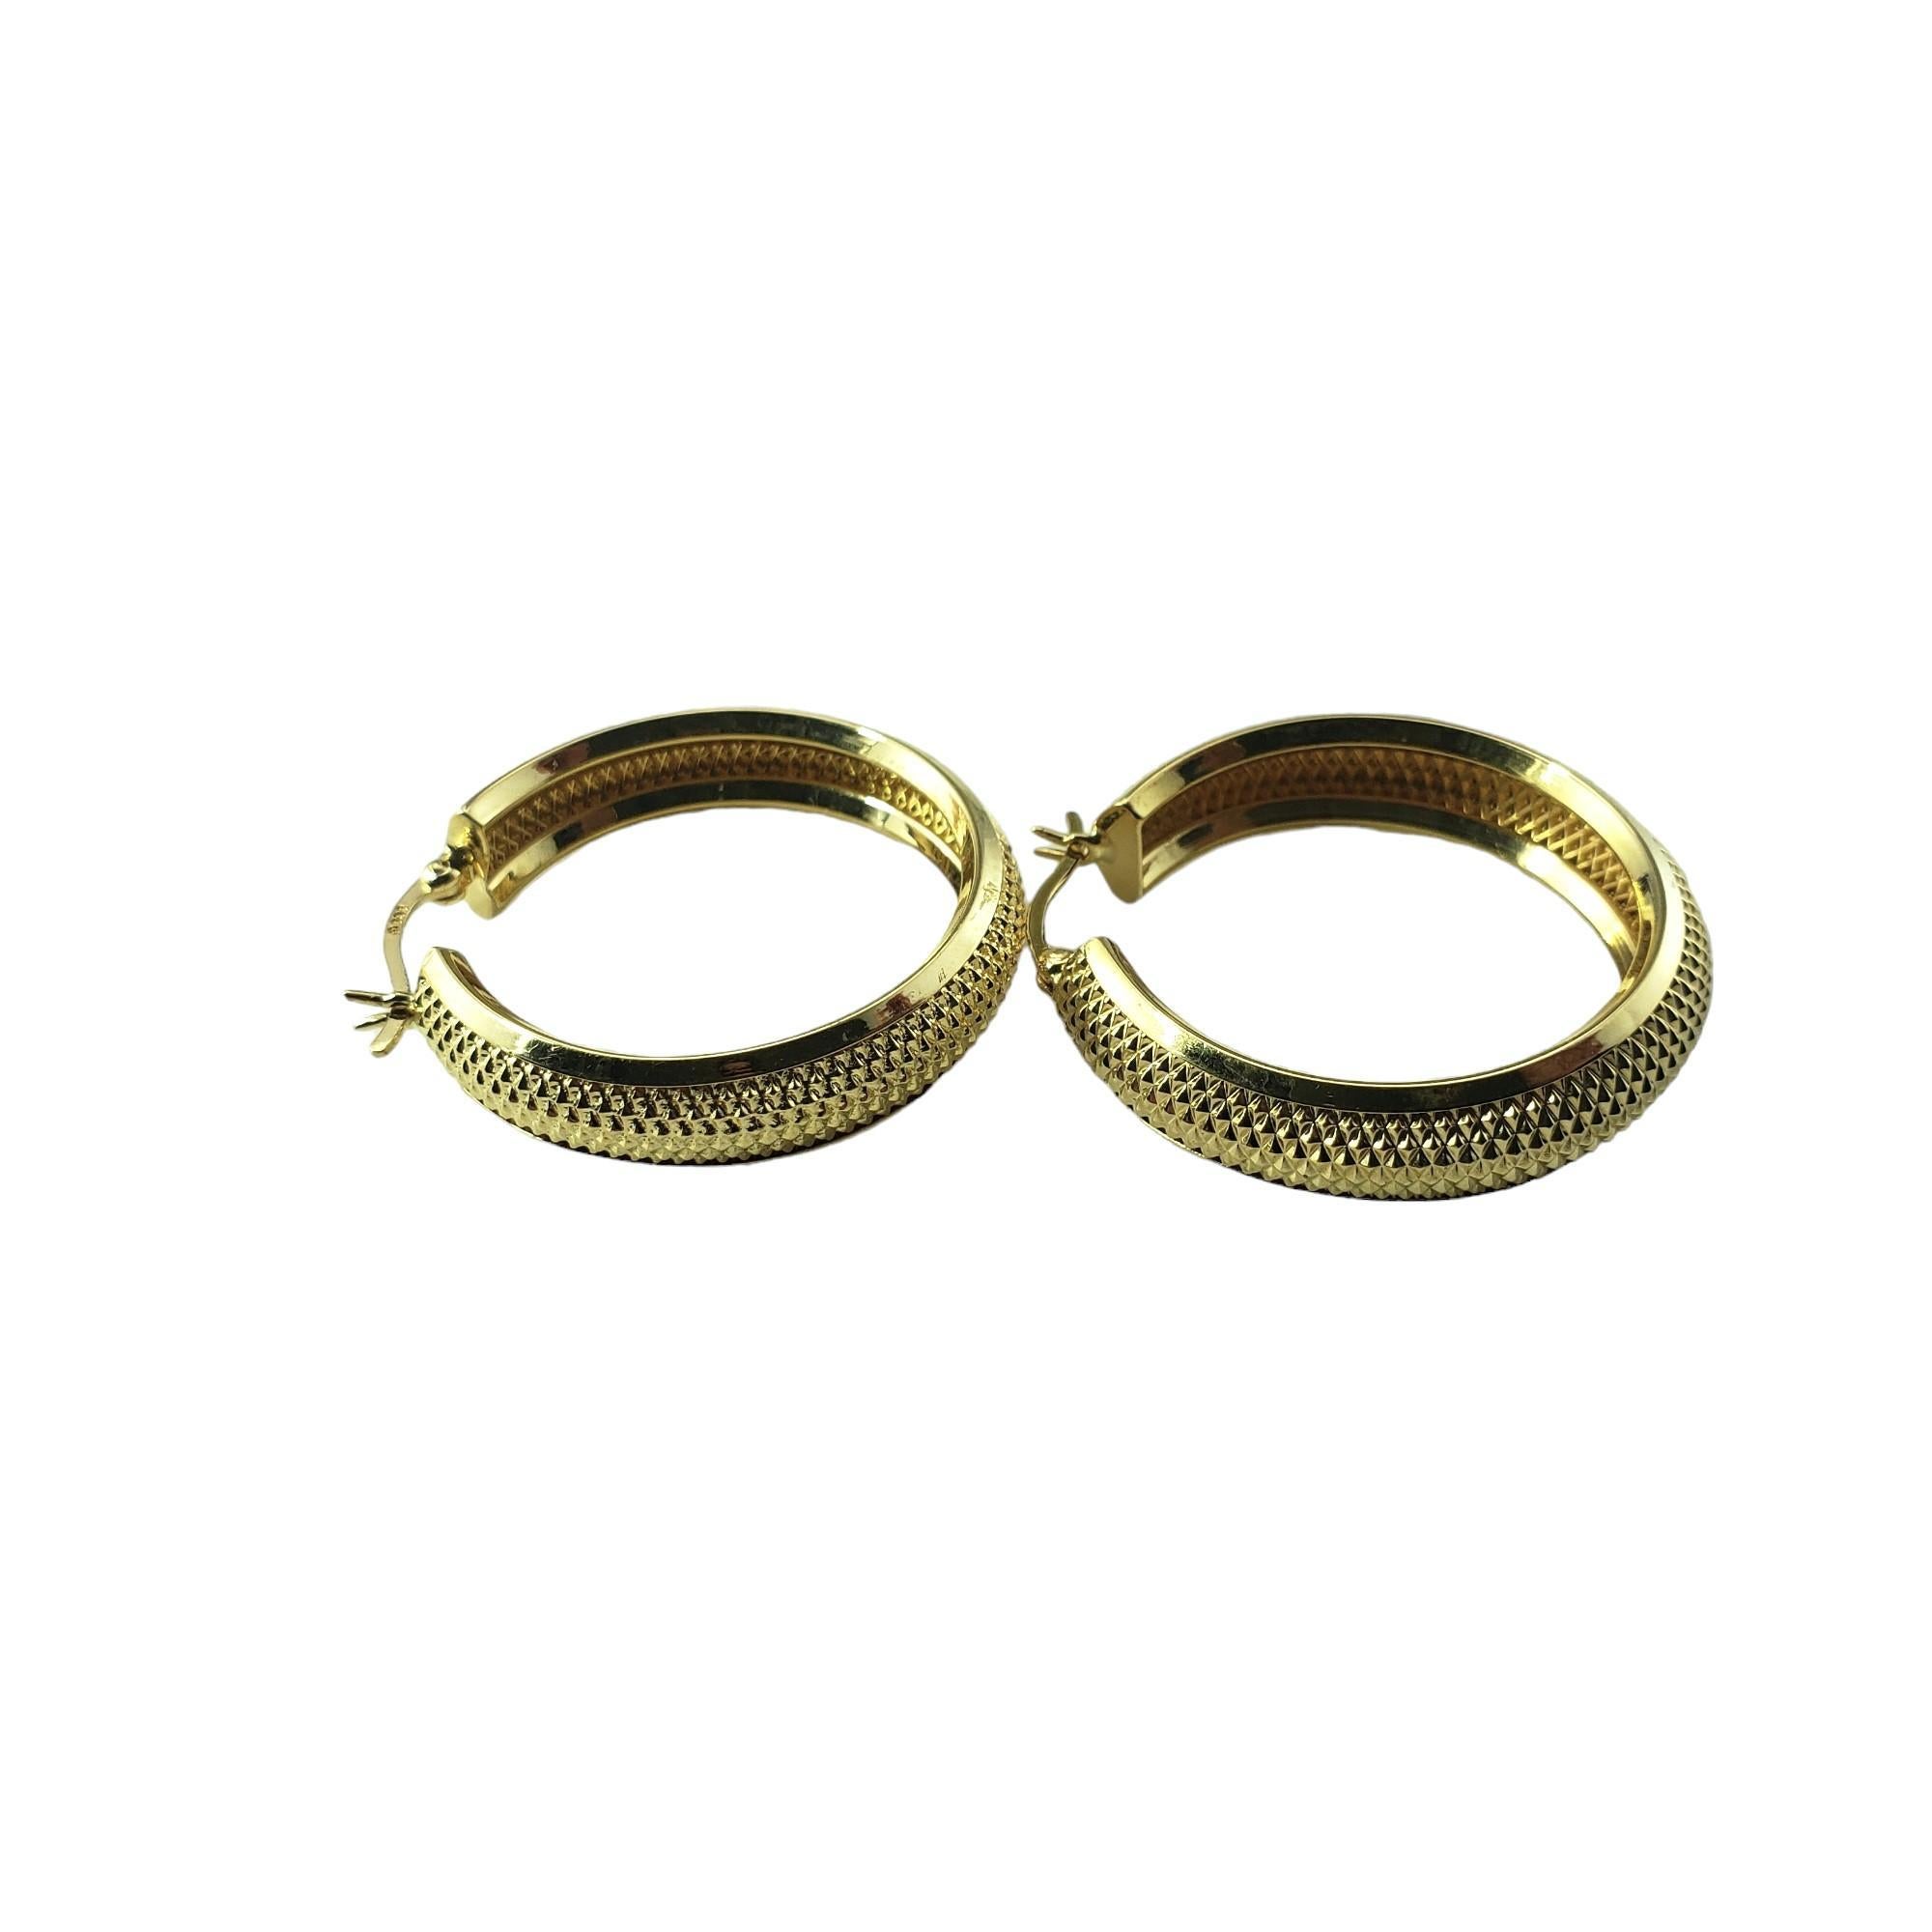 Vintage 14 Karat Yellow Gold Textured Hoop Earrings #15337 In Good Condition For Sale In Washington Depot, CT